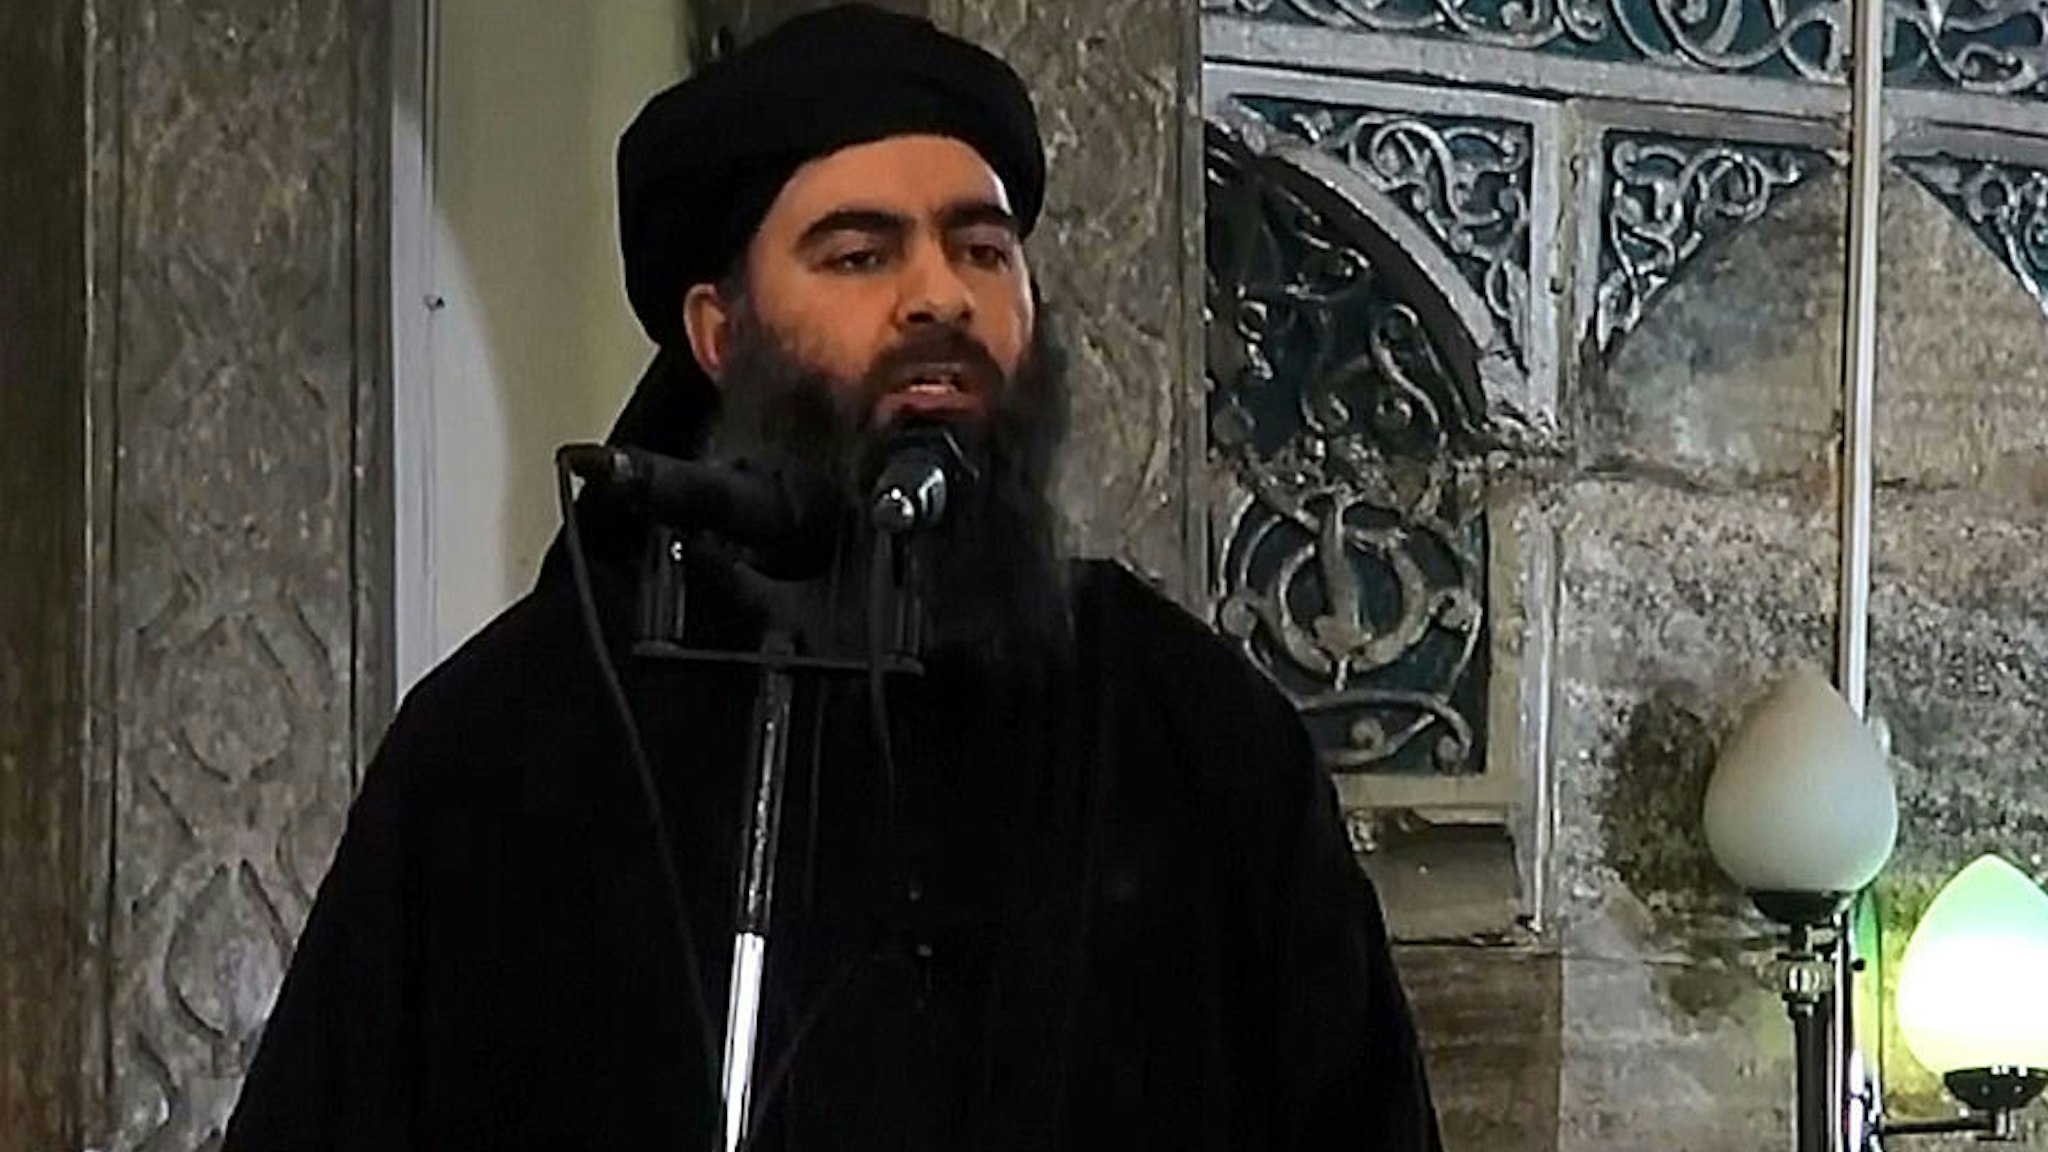 An image grab taken from a video released on July 5, 2014 by Al-Furqan Media shows alleged Islamic State of Iraq and the Levant (ISIL) leader Abu Bakr al-Baghdadi preaching during Friday prayer at a mosque in Mosul.(Photo by Al-Furqan Media/Anadolu Agency/Getty Images)